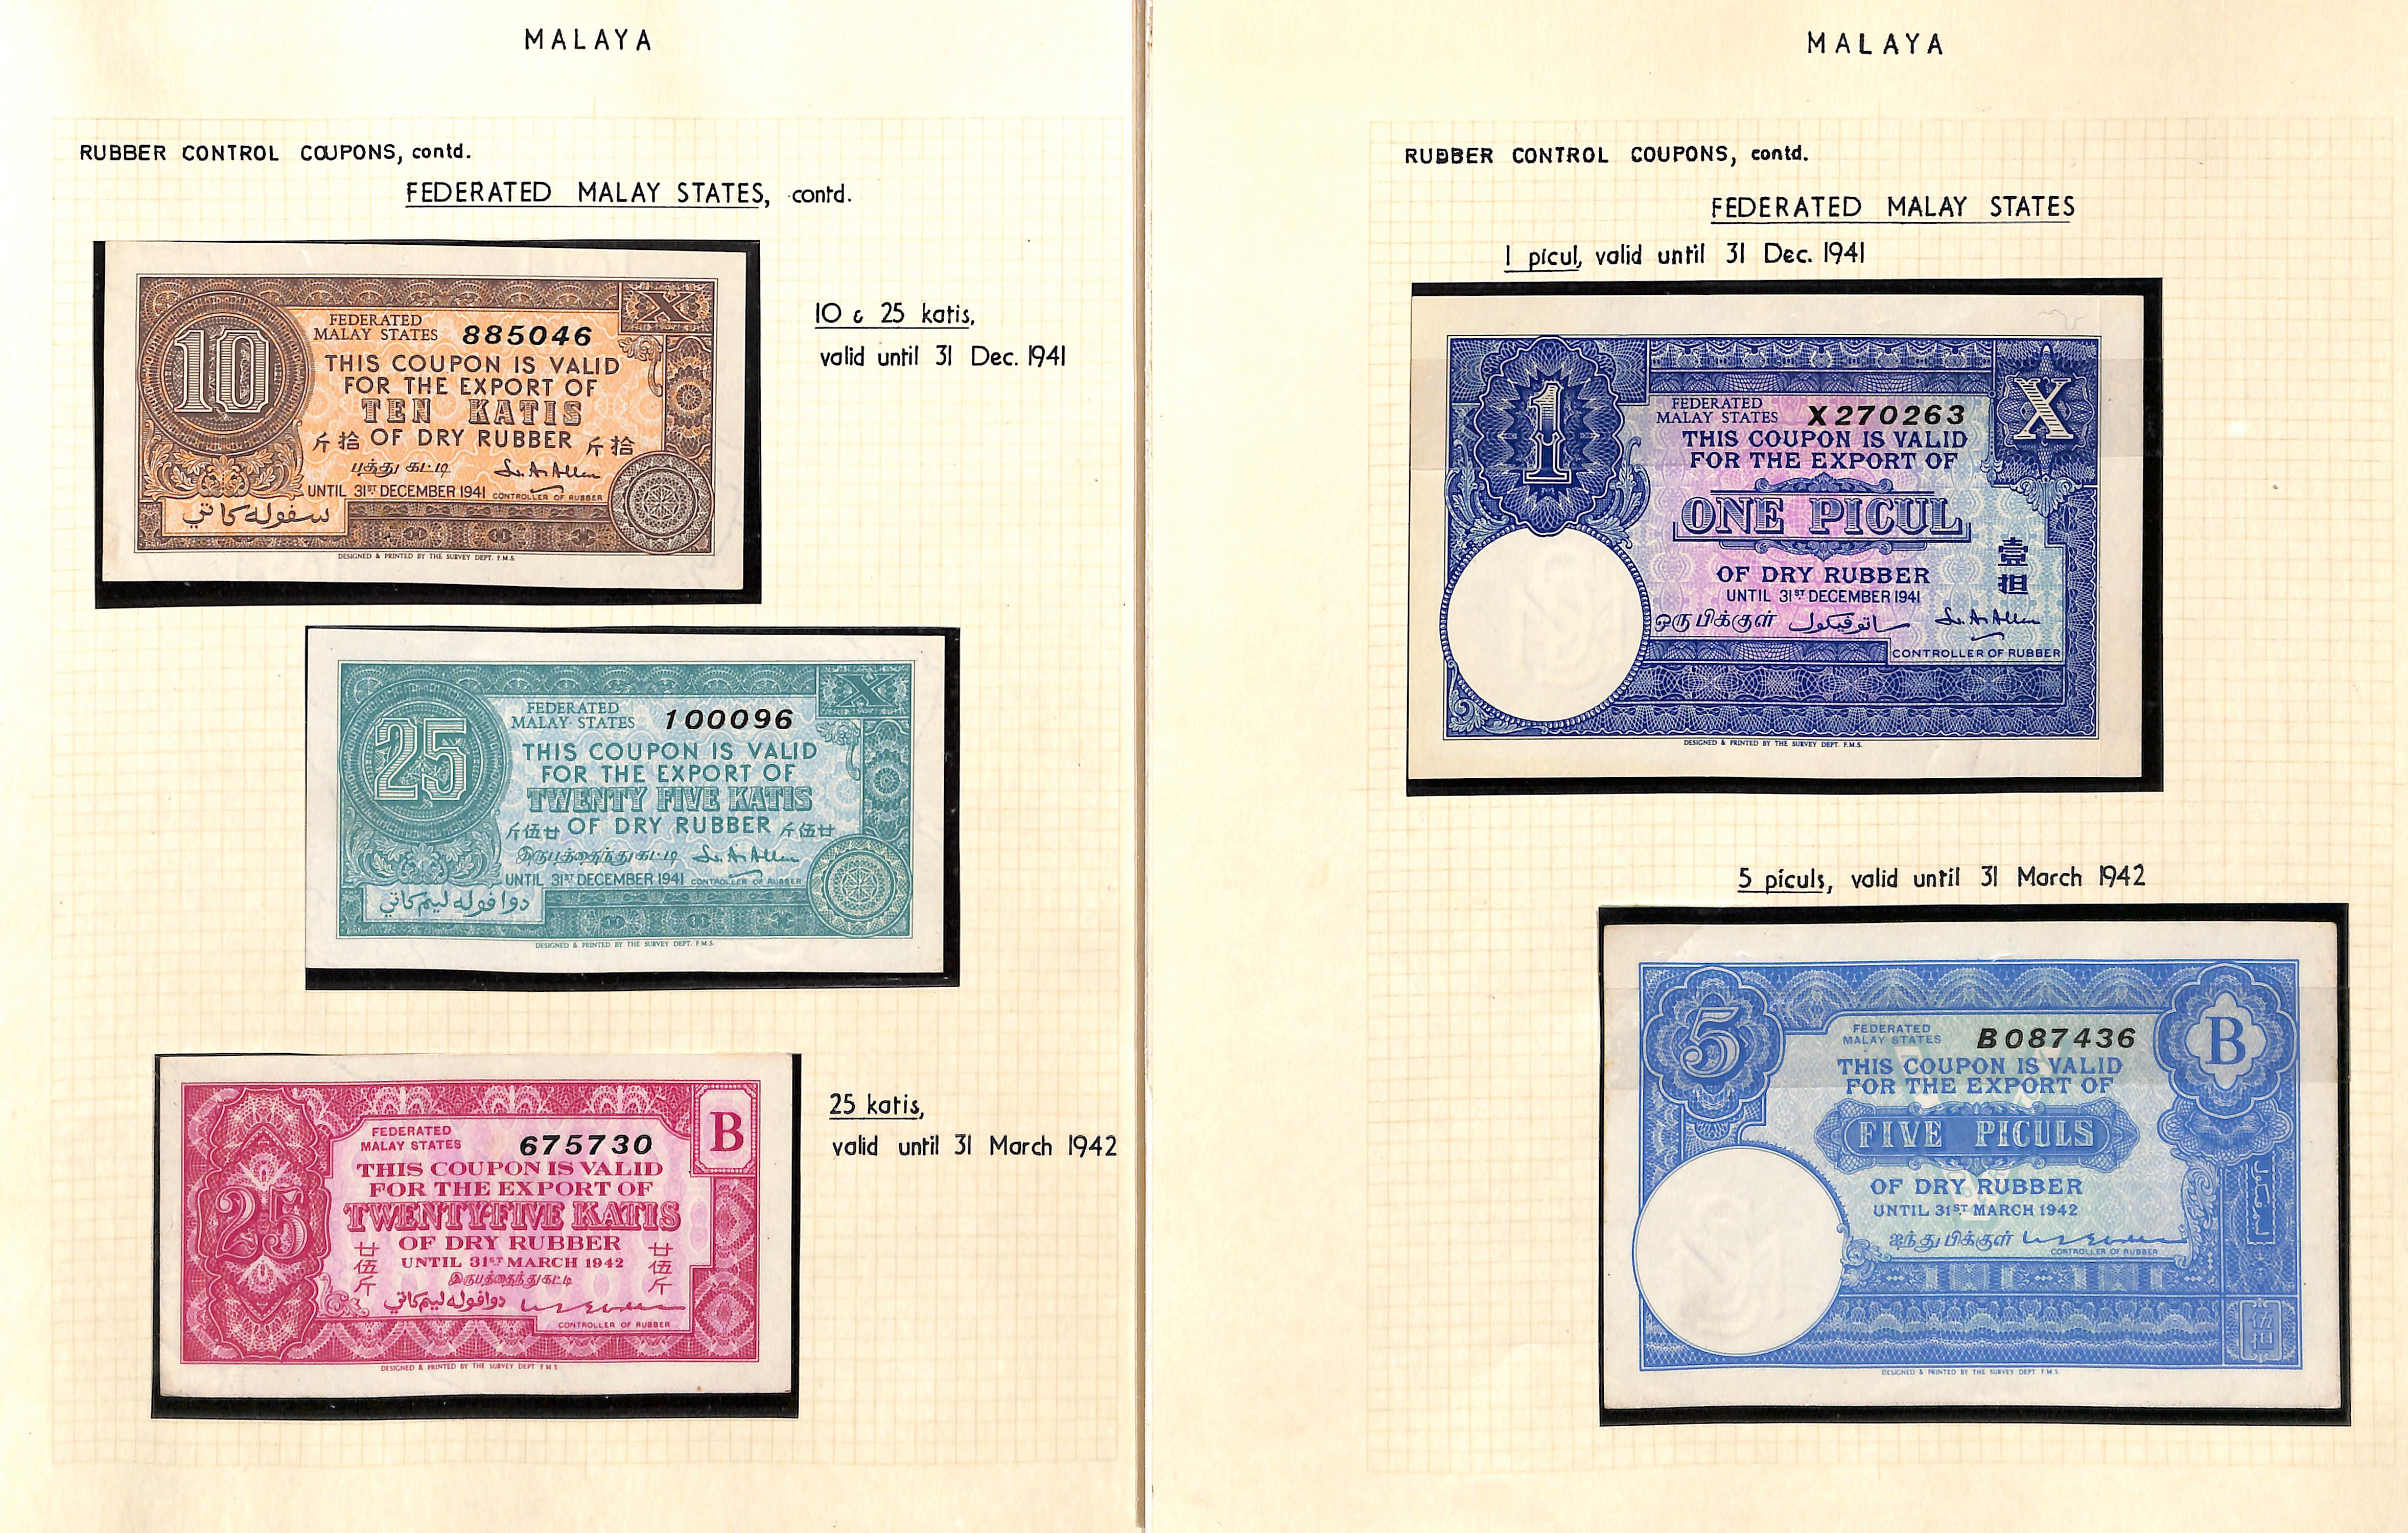 Rubber Control. 1940-42 Coupons for the export of dry rubber (16) or coagulant (13), issued in - Image 2 of 4